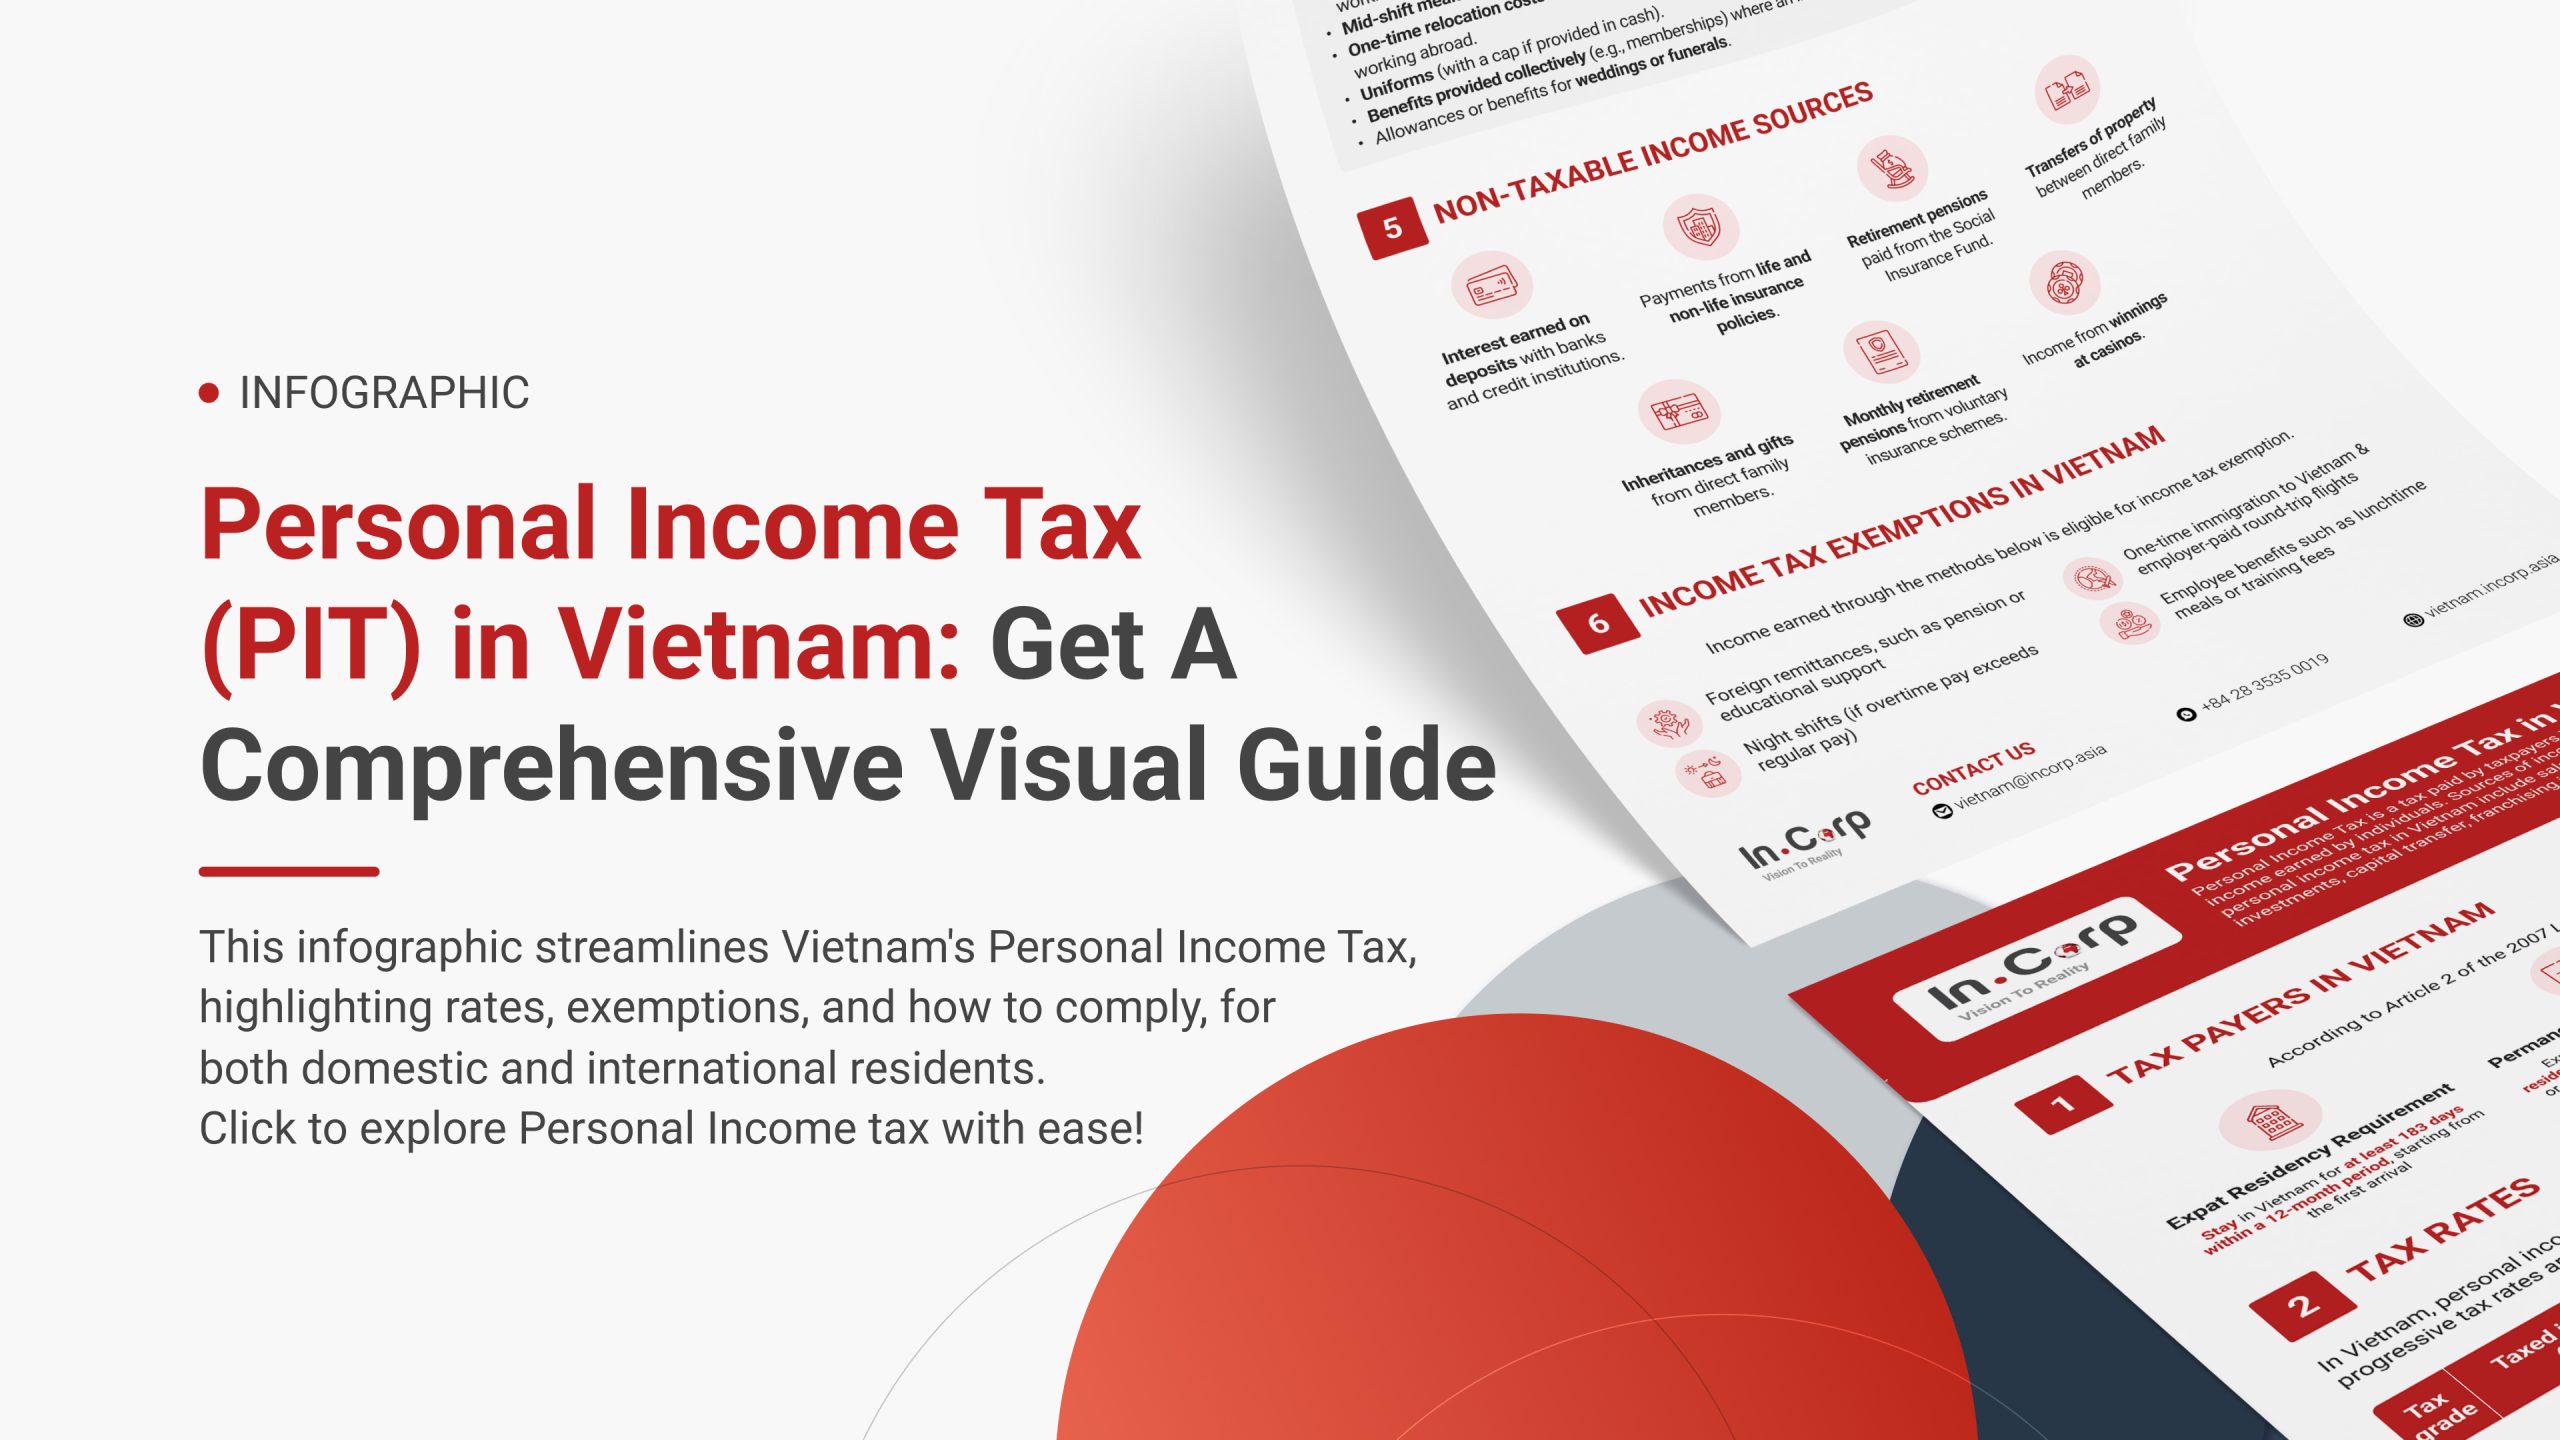 Simplifying Personal Income Tax (PIT) in Vietnam: An Infographic Guide